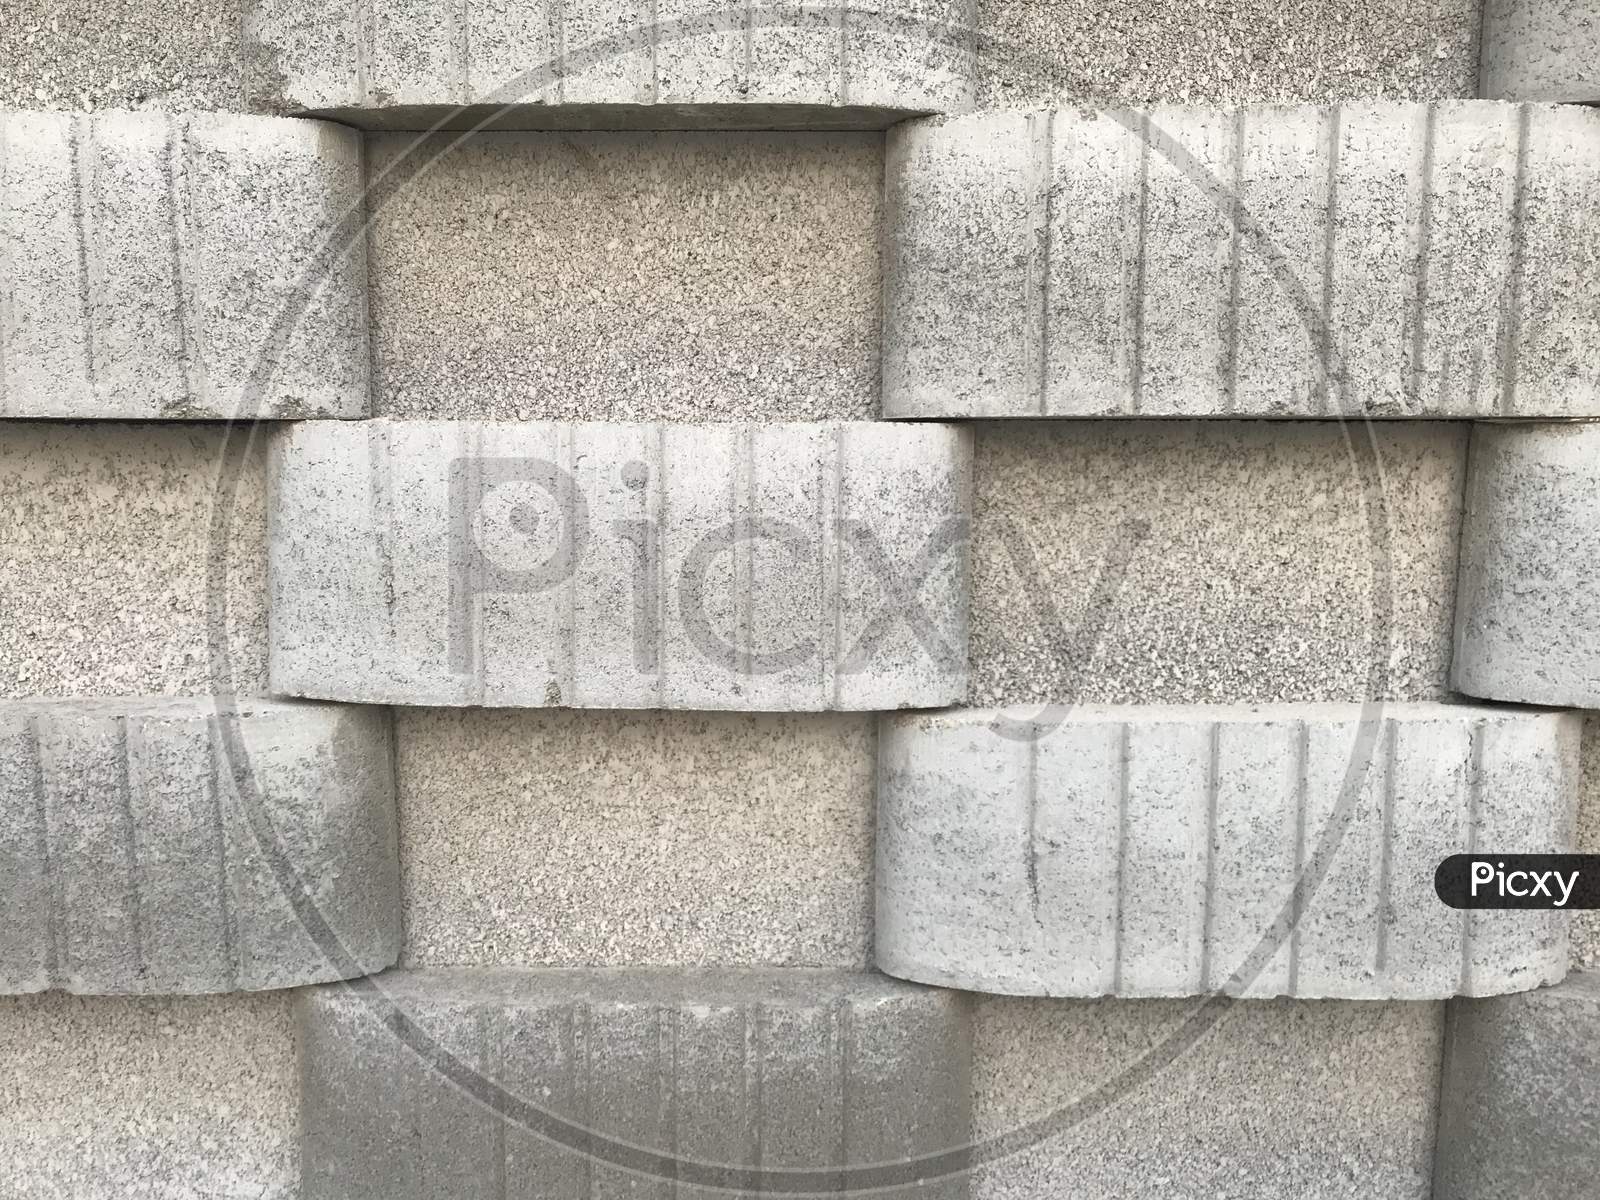 Concrete Block Wall Constructed For Public Toilet In Three Dimensional View Like In And Out Pattern Using Blocks Cement And Sand Bond